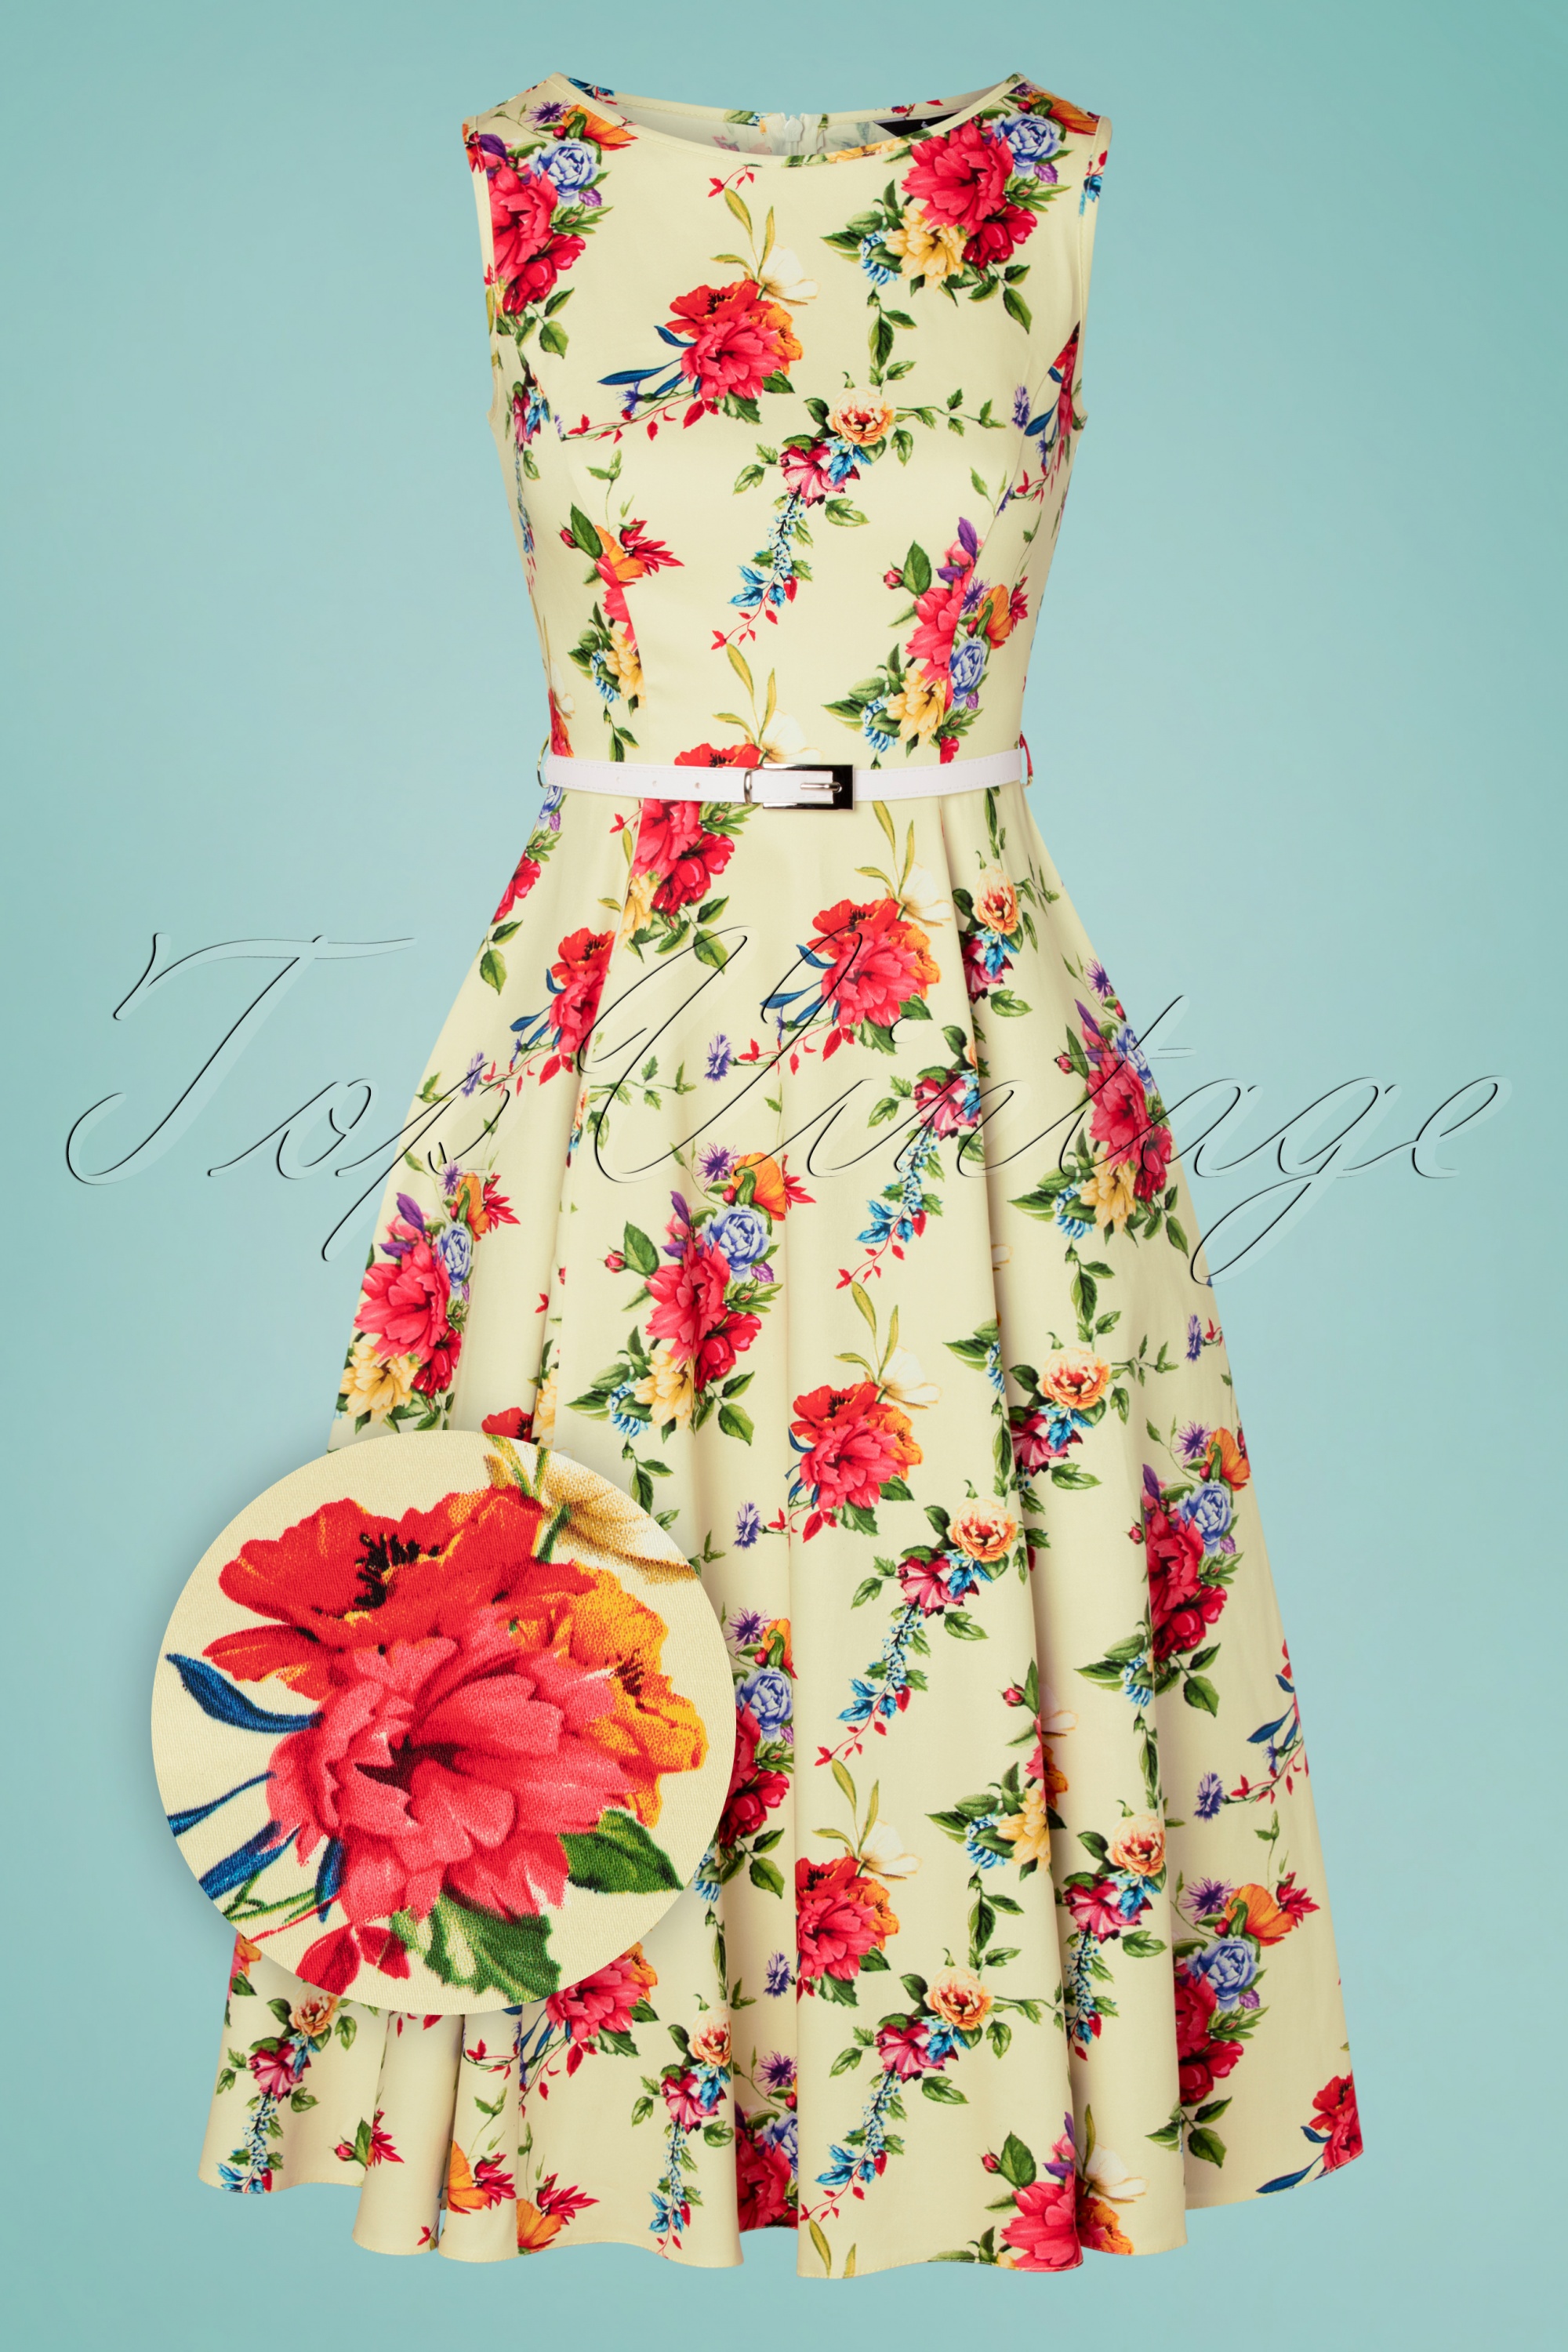 Lady V by Lady Vintage - Hepburn blossoming poppy swing jurk in crème